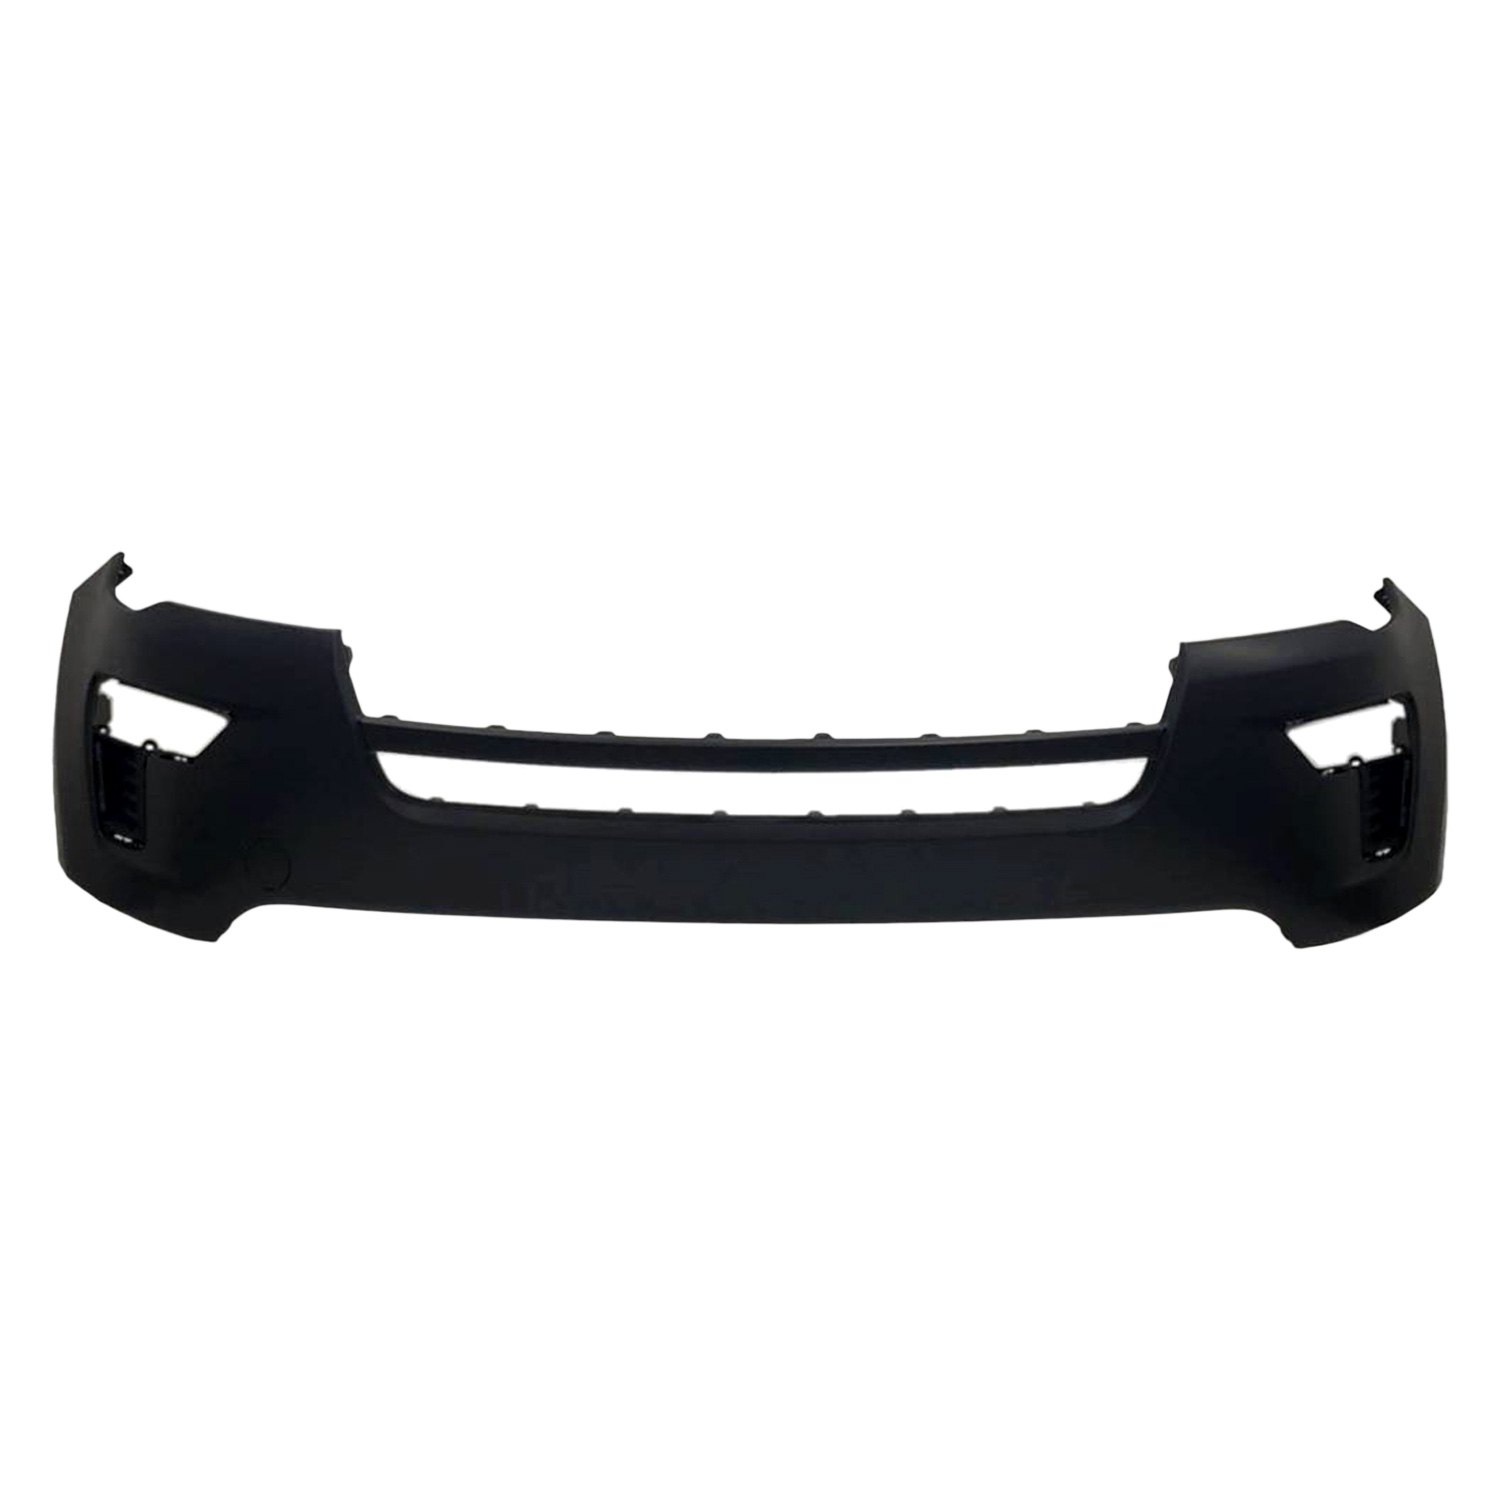 Replace® Fo1014130 Front Upper Bumper Cover Standard Line 0405